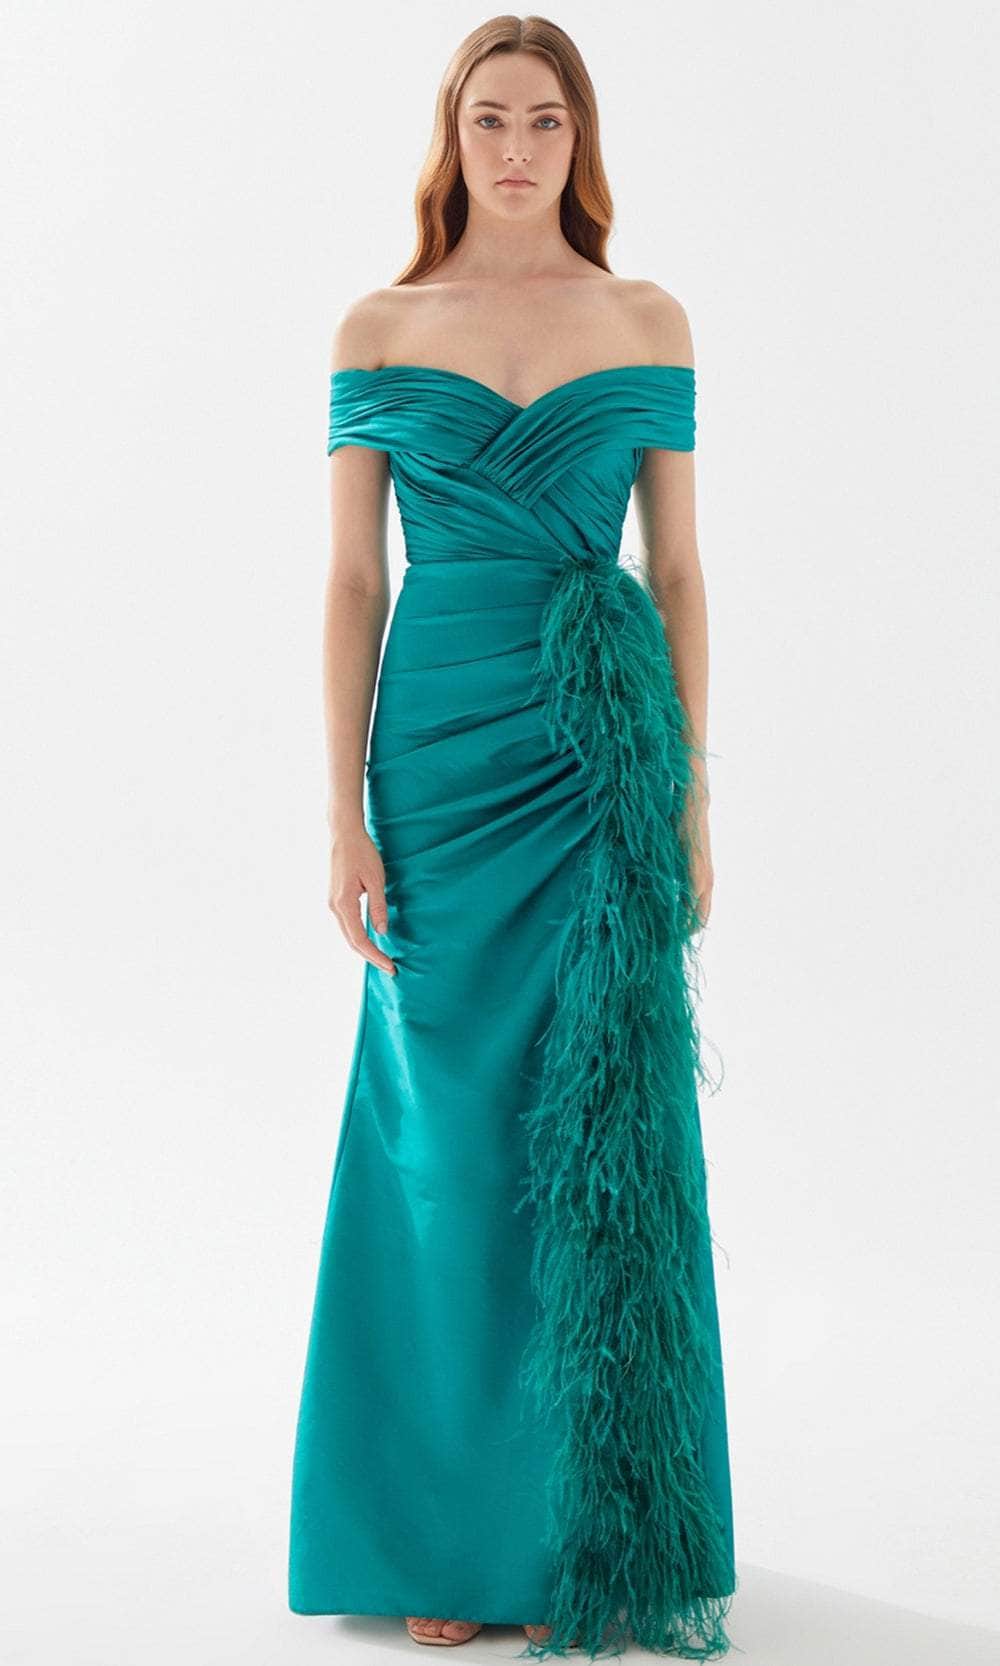 Tarik Ediz 52112 - Ruched and Feathered Evening Gown Evening Dresses 00 / Emerald